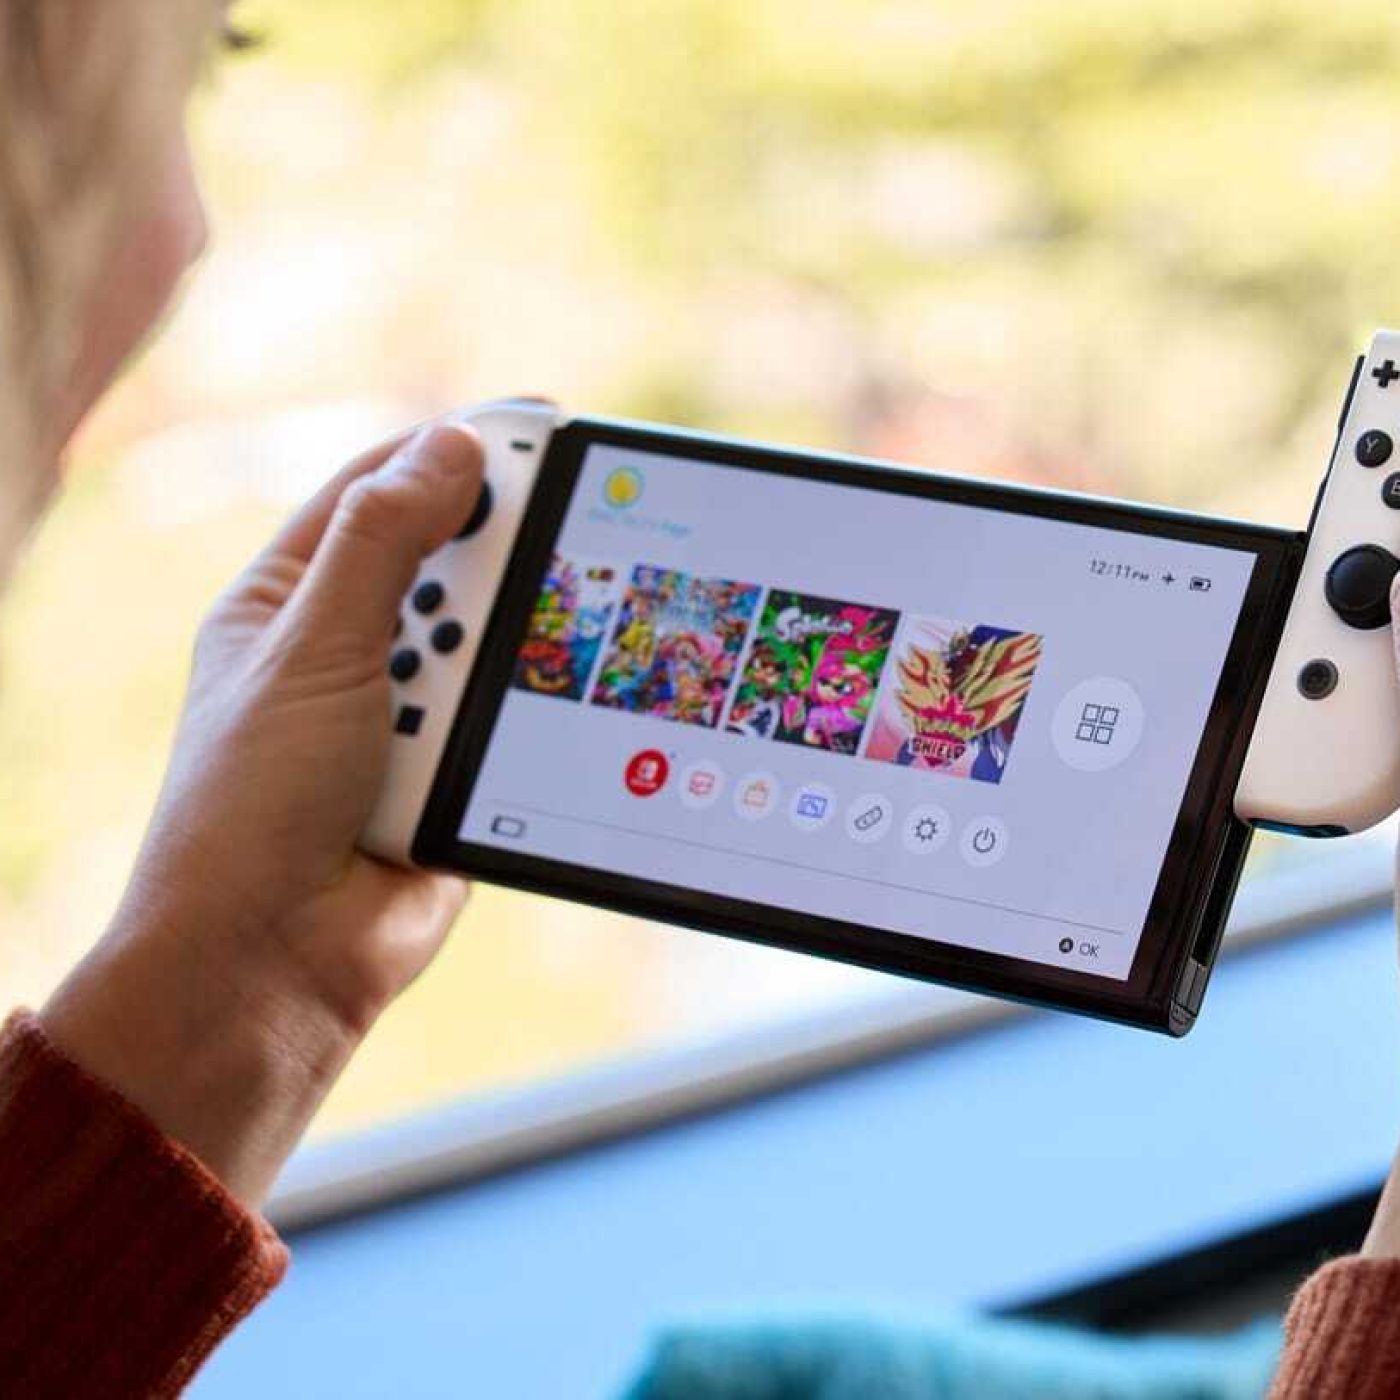 Nintendo Switch Announces New Firmware Update Version 12.1.0 